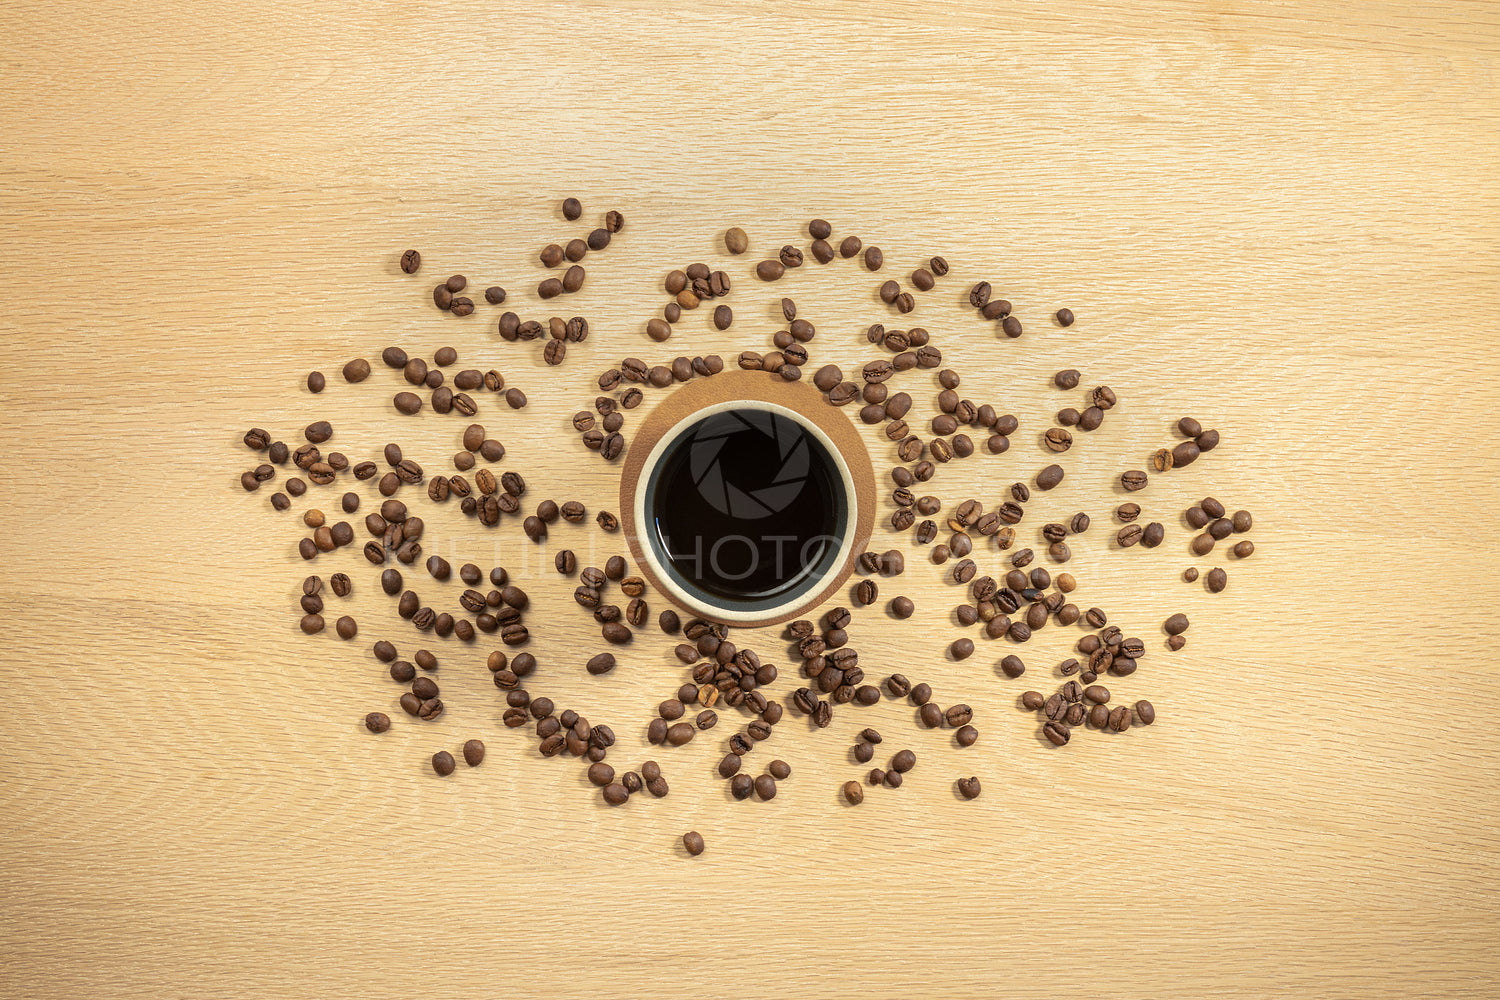 Overhead view of roasted beans and coffee in cup on table